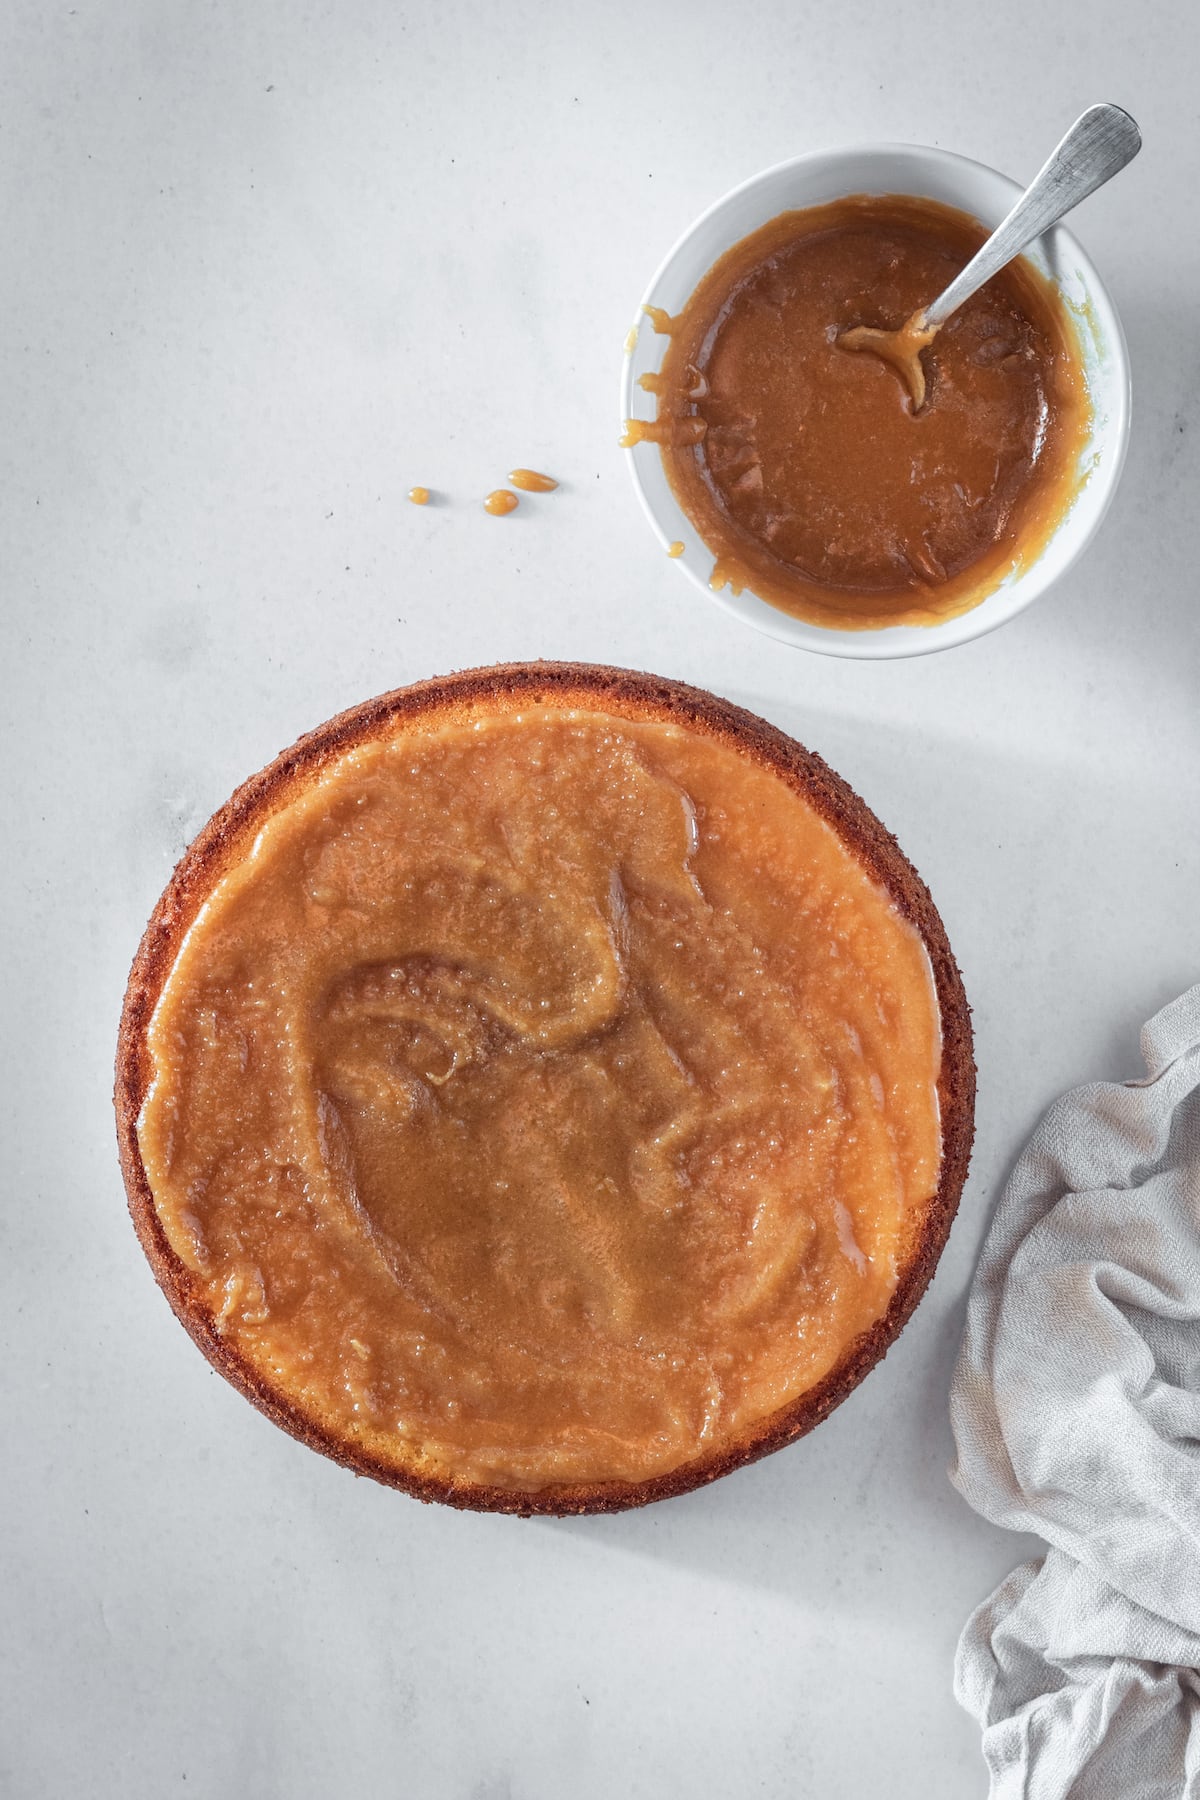 Overhead shot of caramel spread onto a layer of cake